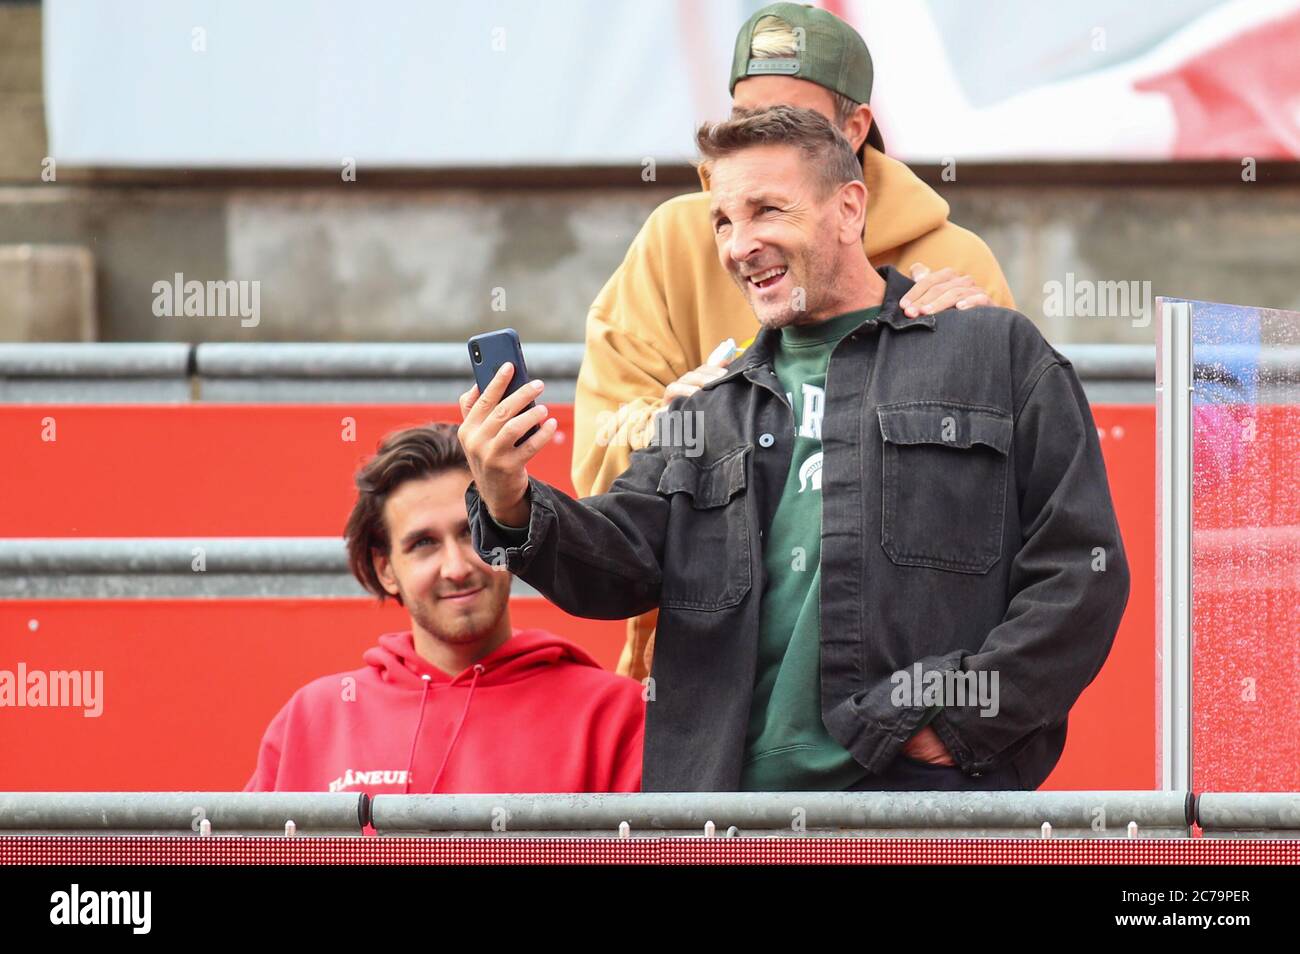 Berlin, Germany. 15th July, 2020. Tennis: Invitational tournament 'bett1aces' for ladies and gentlemen at the Steffi Graf Stadium. Men, singles, final, Berrettini (Italy) - Thiem (Austria). Mark Keller, actor and tennis player, stands laughing with a smartphone on the grandstand. Credit: Andreas Gora/dpa/Alamy Live News Stock Photo